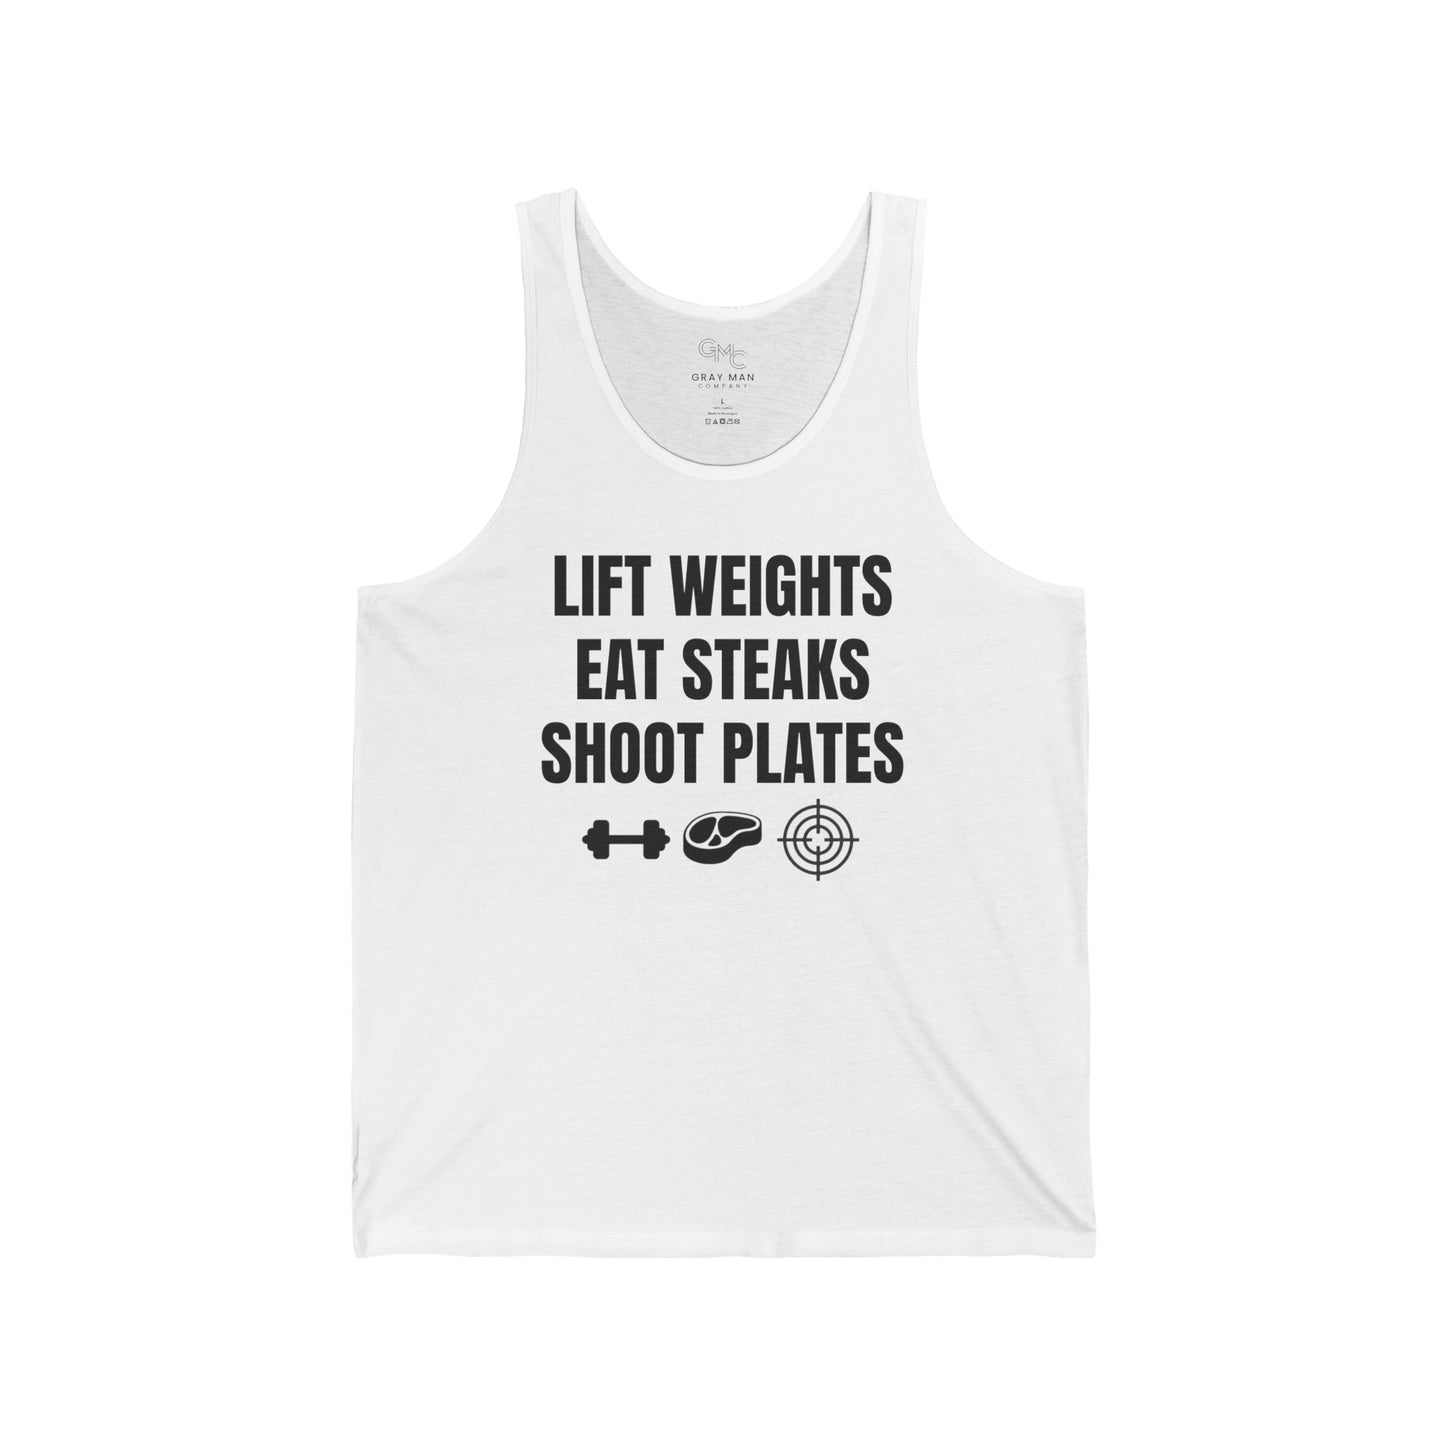 EDC Graphic Tank - LIFT WEIGHTS, EAT STEAKS, SHOOT PLATES